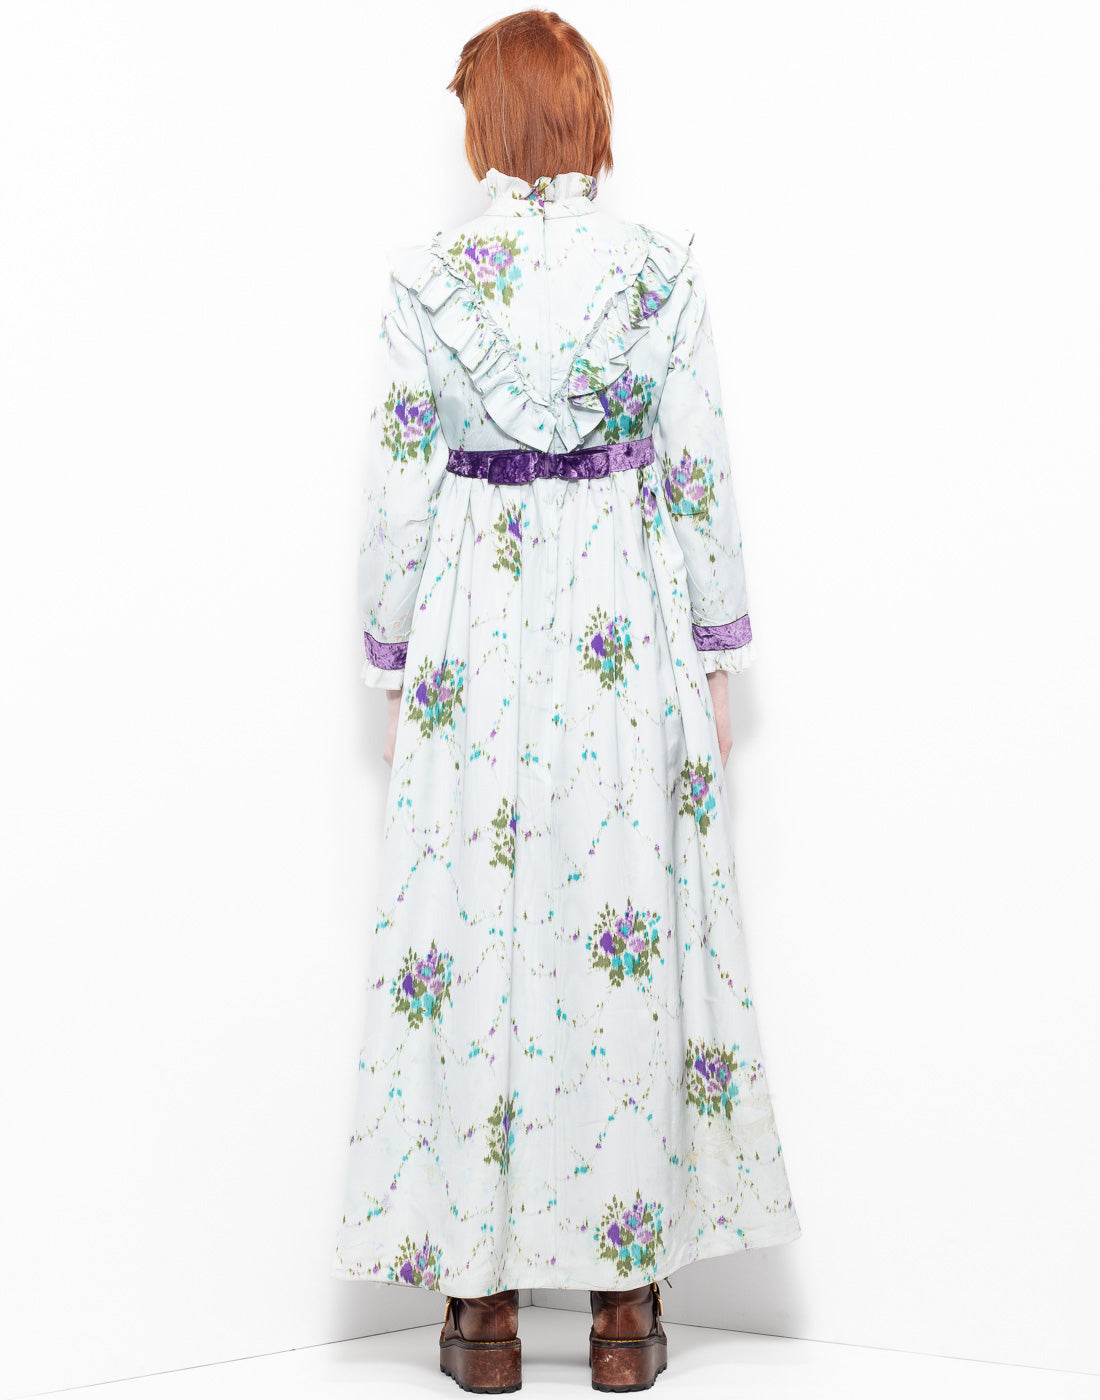 Victorian-style long dress with a floral fabric from ILGWU archives